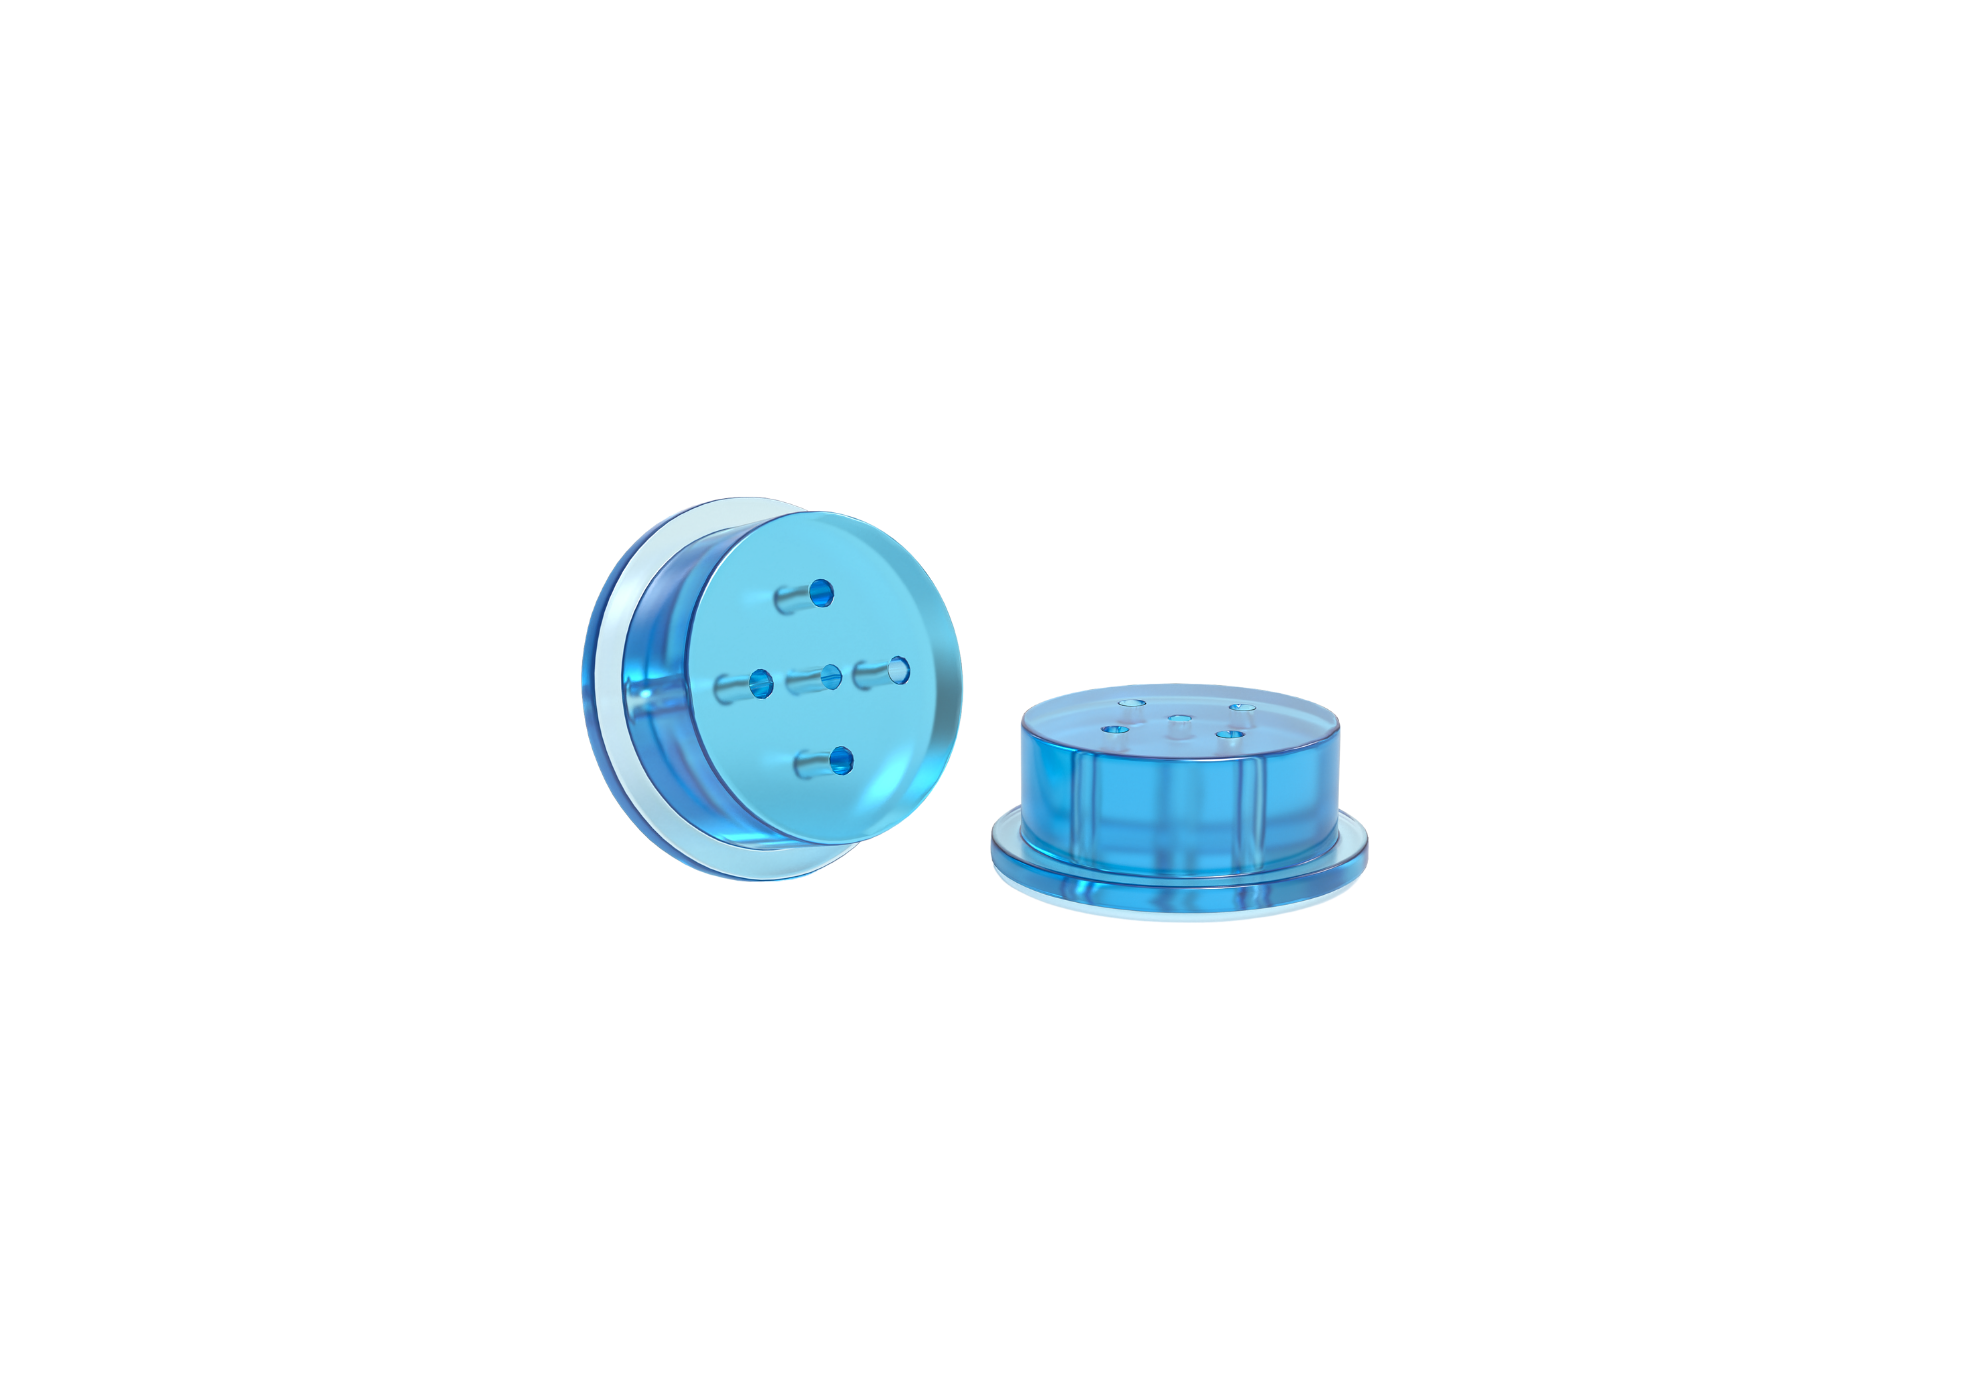 Replacement Attenuation Filters for Smaller Ears Earplugs